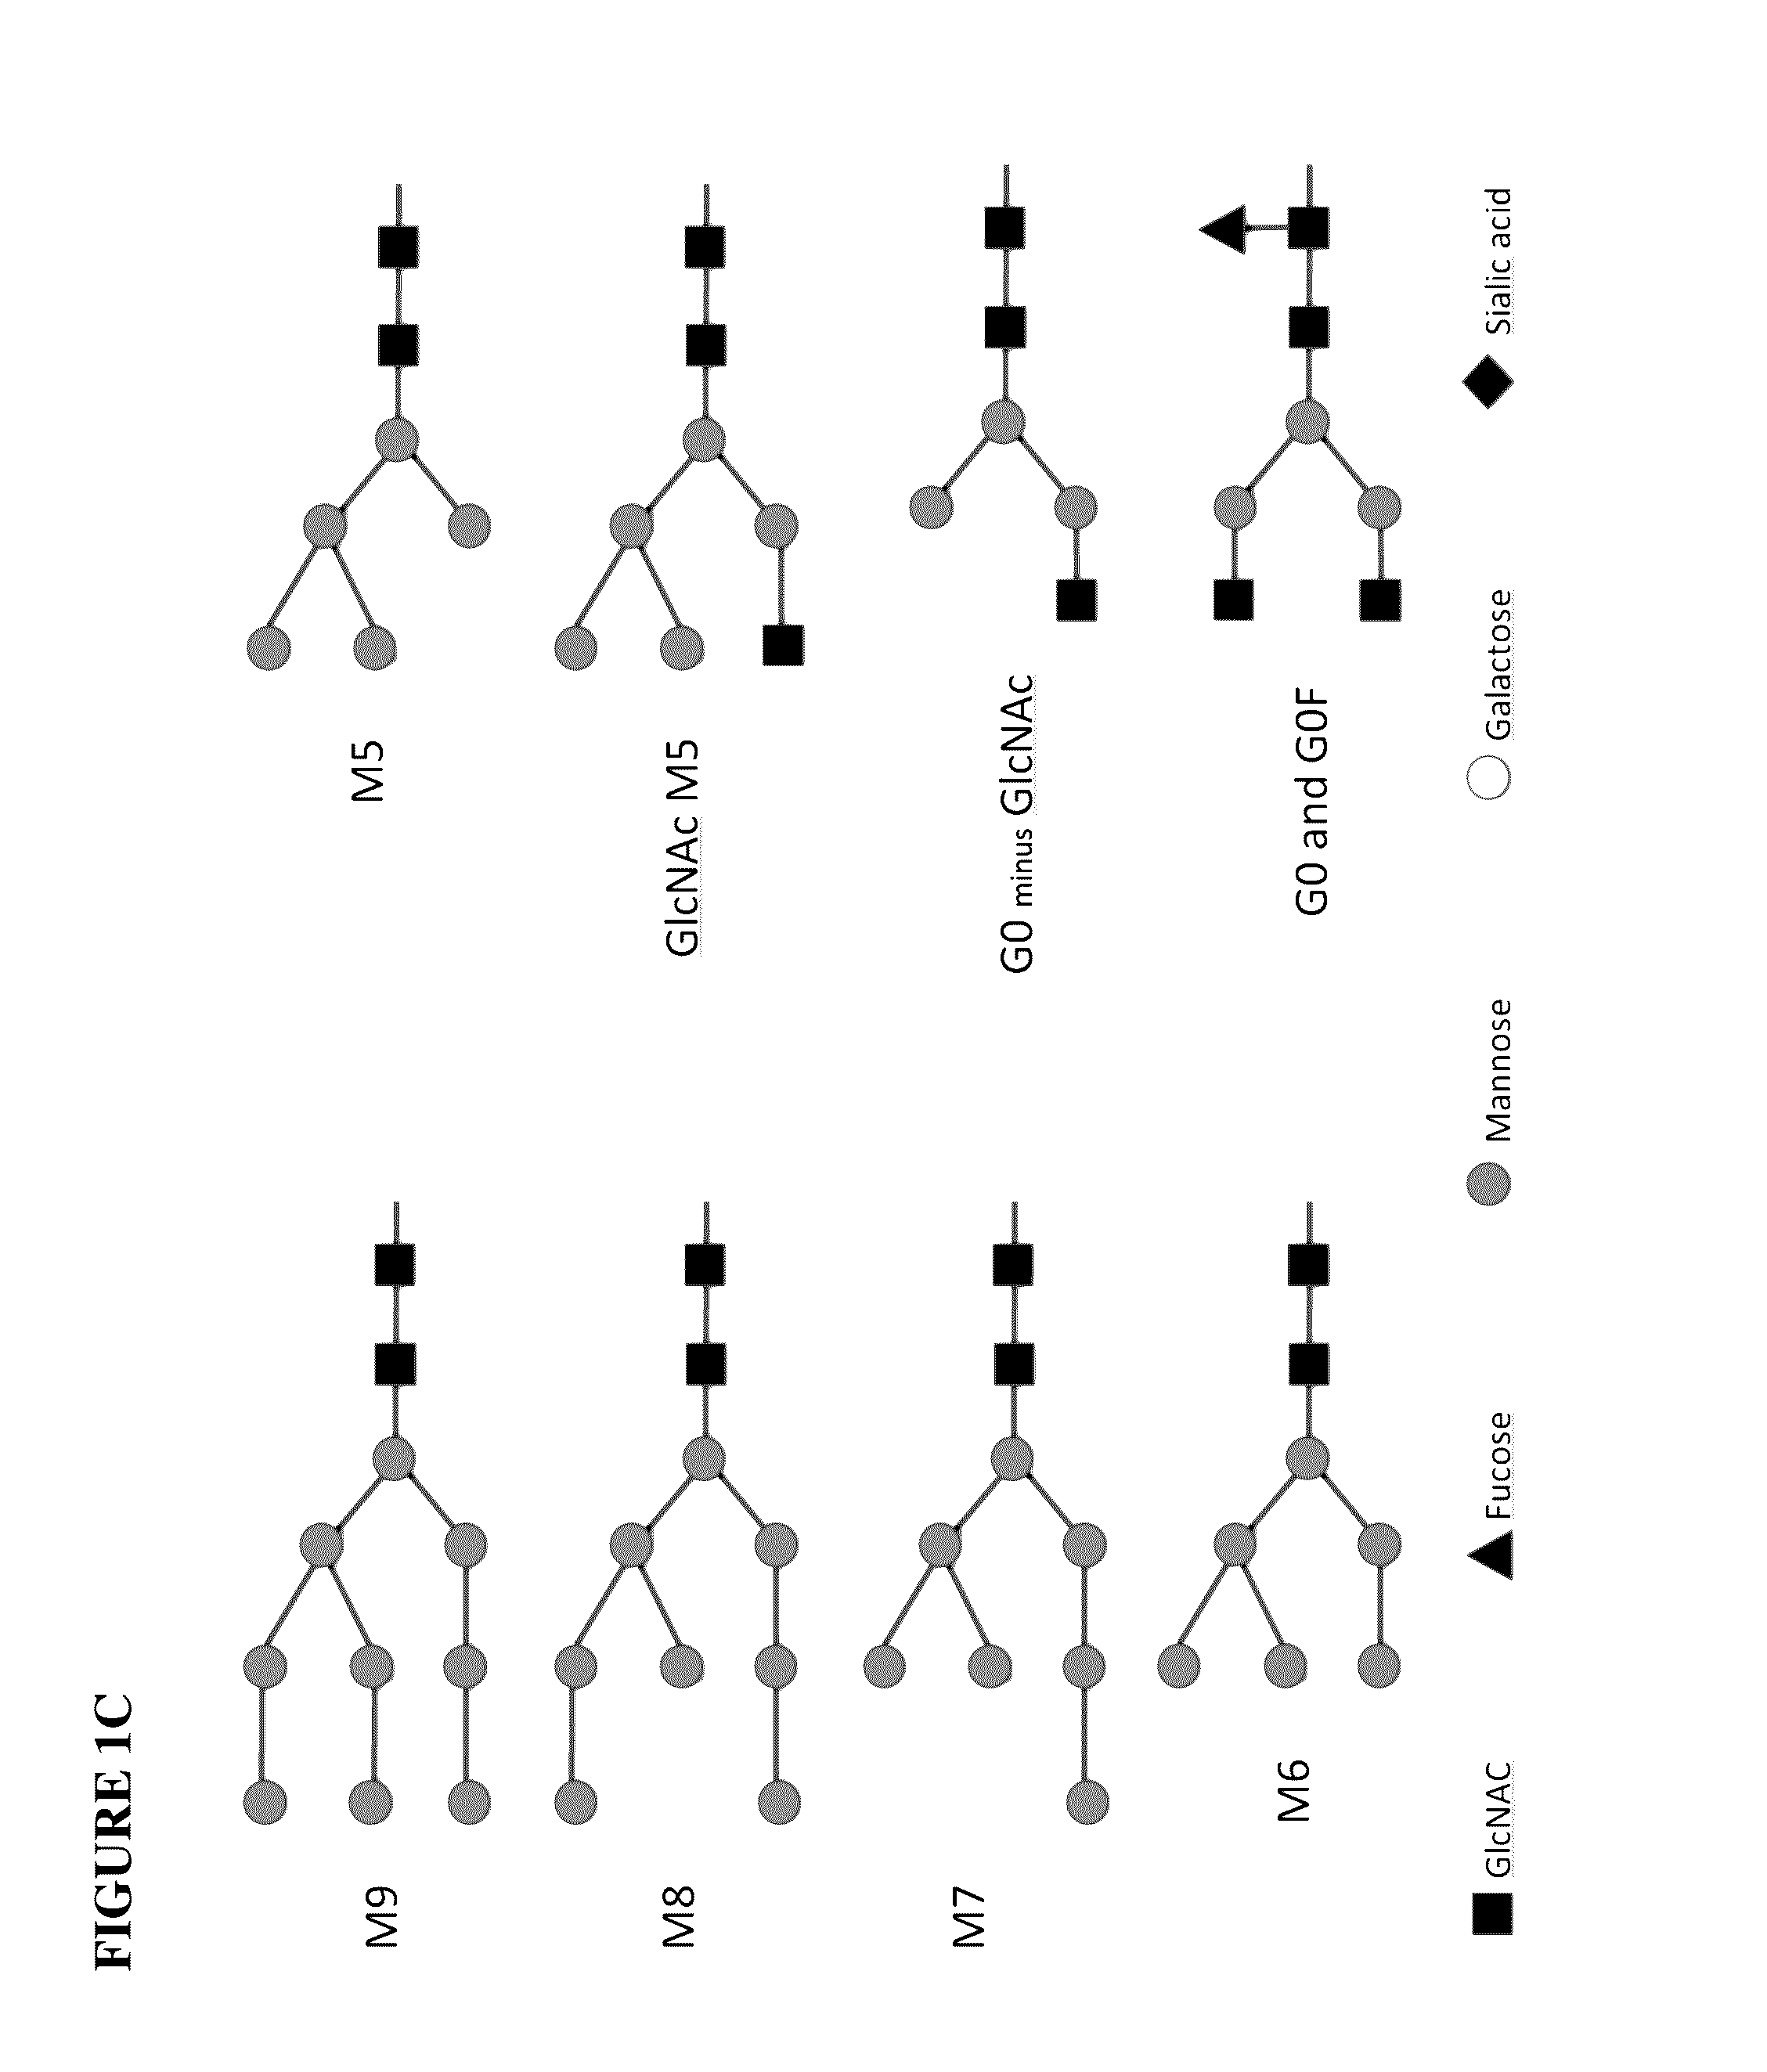 Glycoengineered binding protein compositions